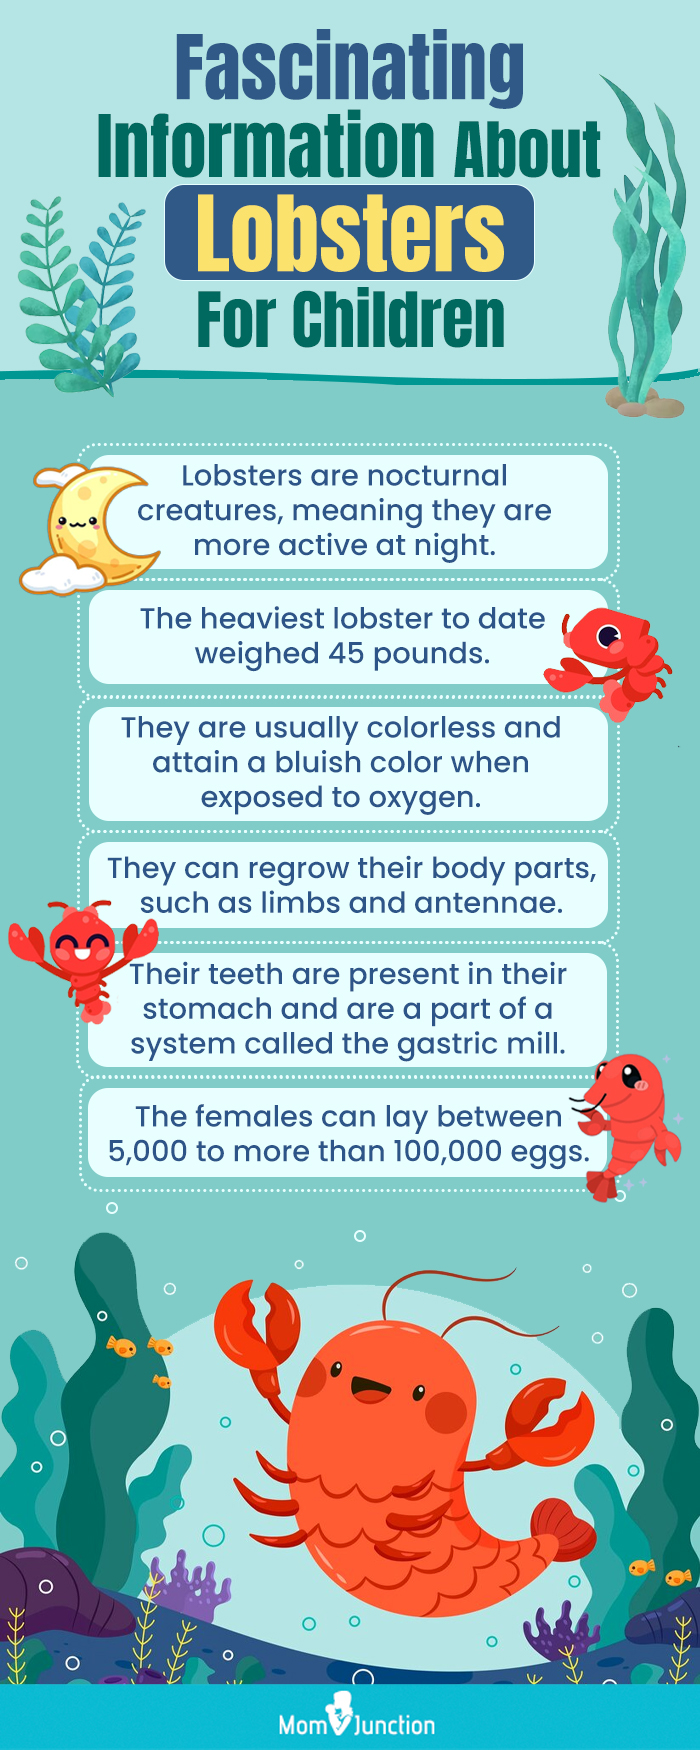 fascinating information about lobsters for children (infographic)